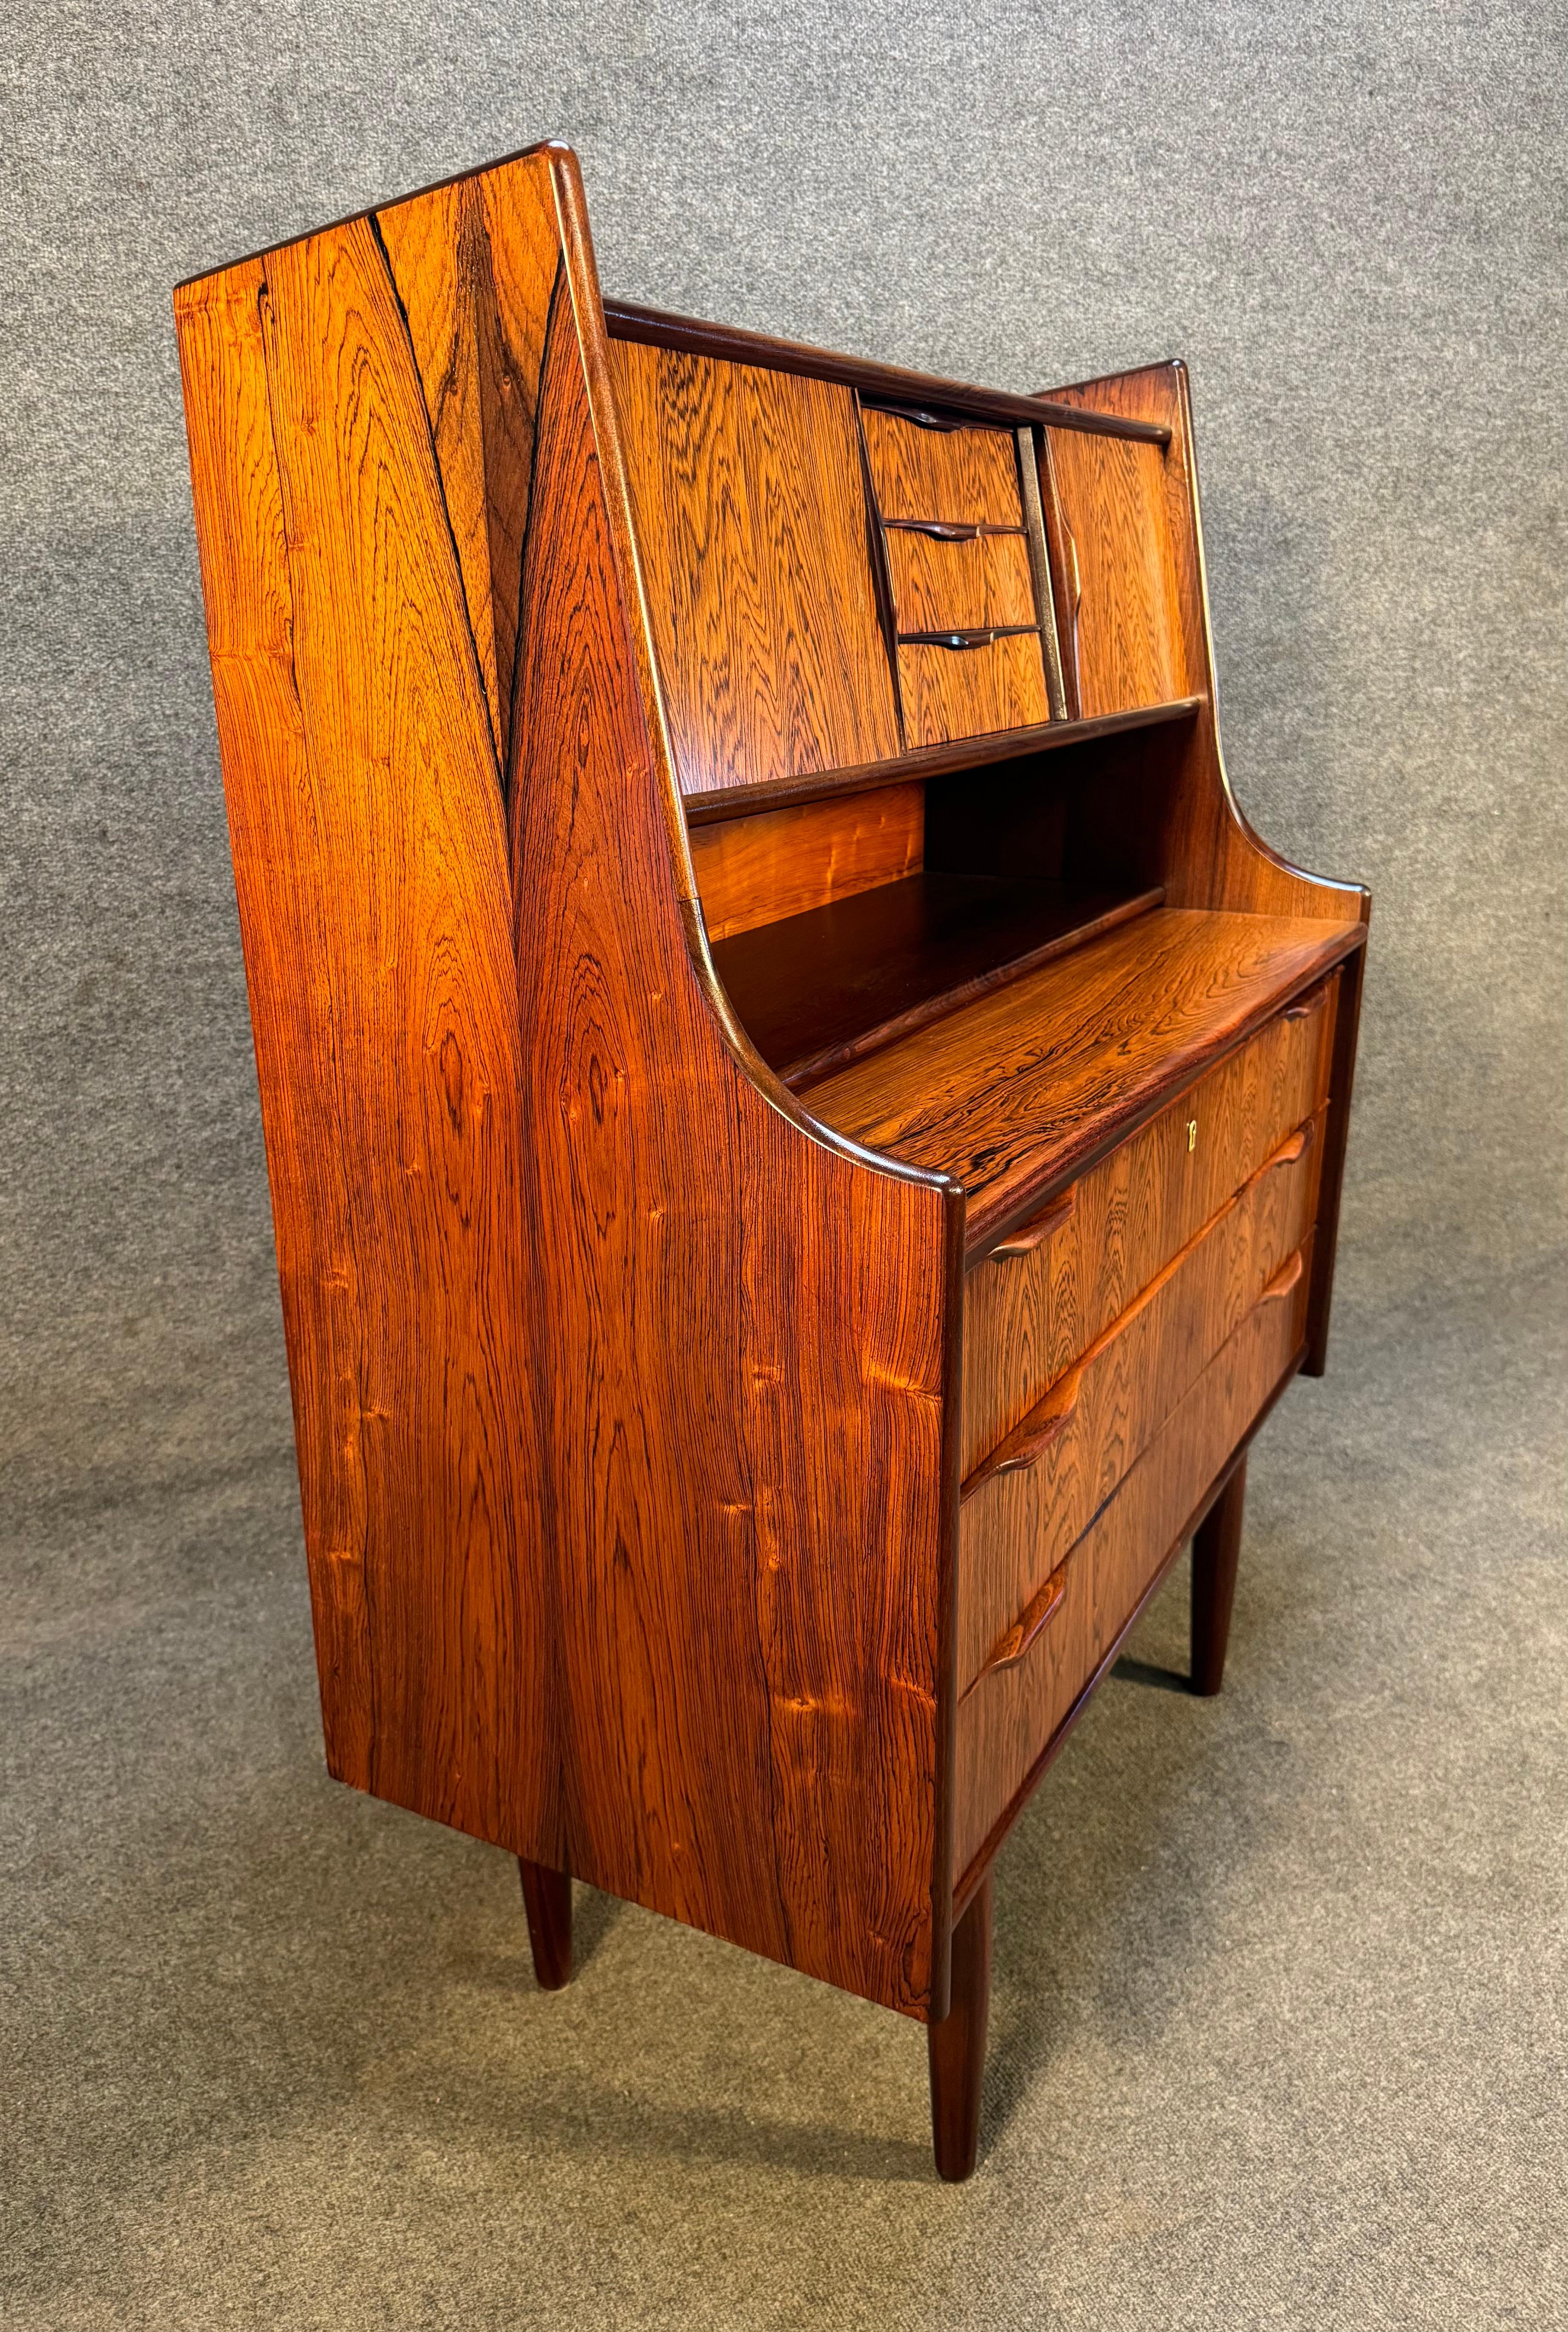 Vintage Danish Mid Century Modern Rosewood Secretary Desk In Good Condition For Sale In San Marcos, CA